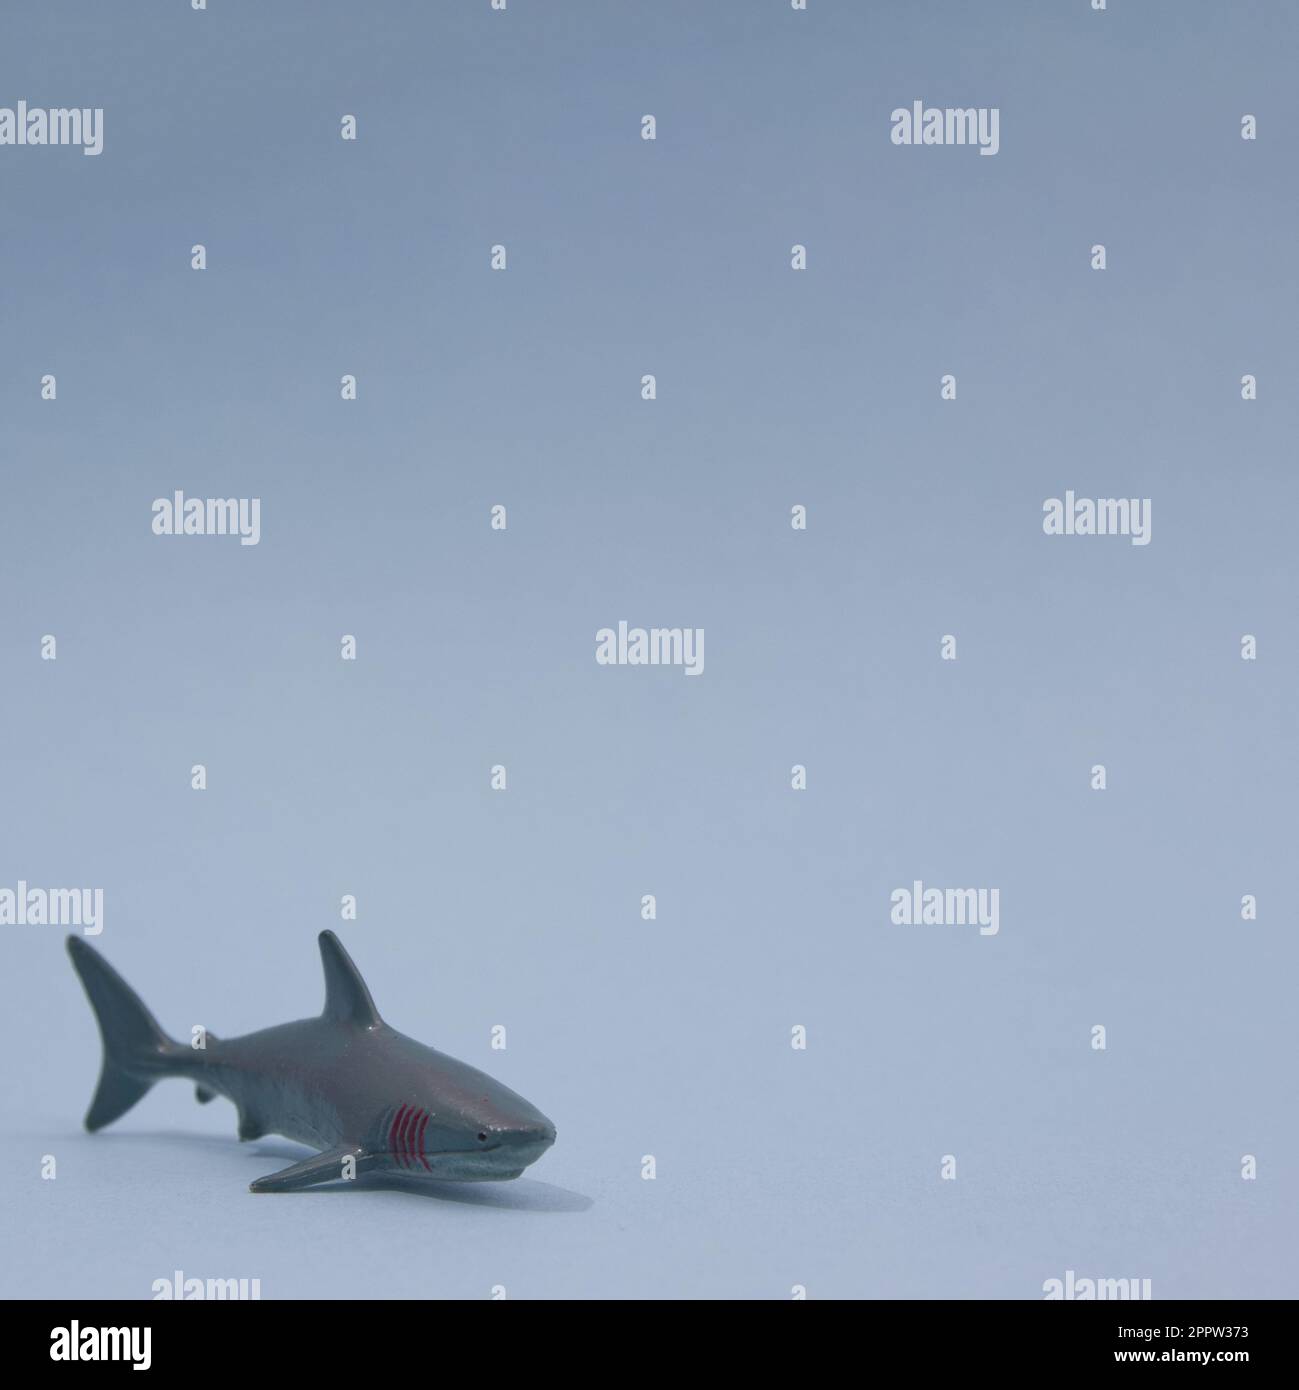 A shark is moving towards you on a blue background with copy space. Minimal wild life on sea scene. Stock Photo